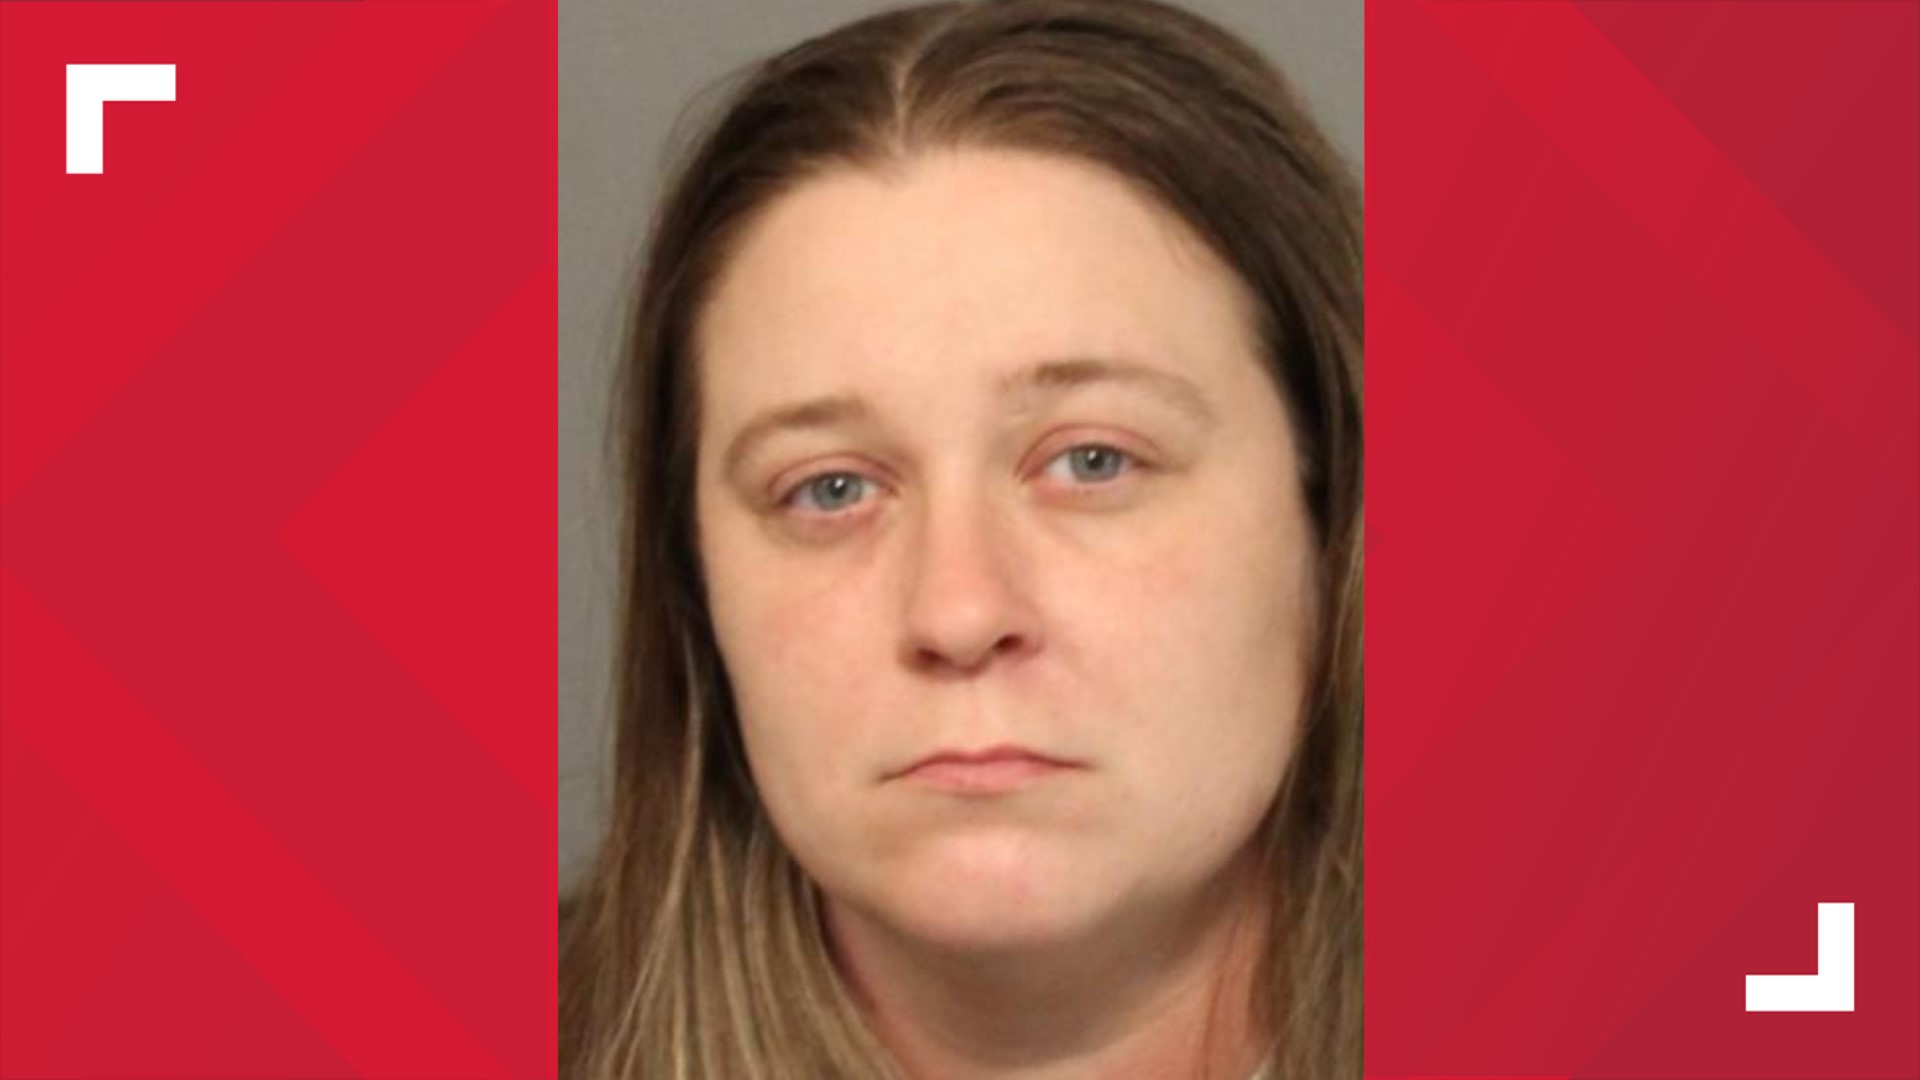 A Duval County jury found Amanda Guthrie guilty Friday of neglect by culpable negligence. She will be back in court Sept. 21 when a sentencing date will be set.